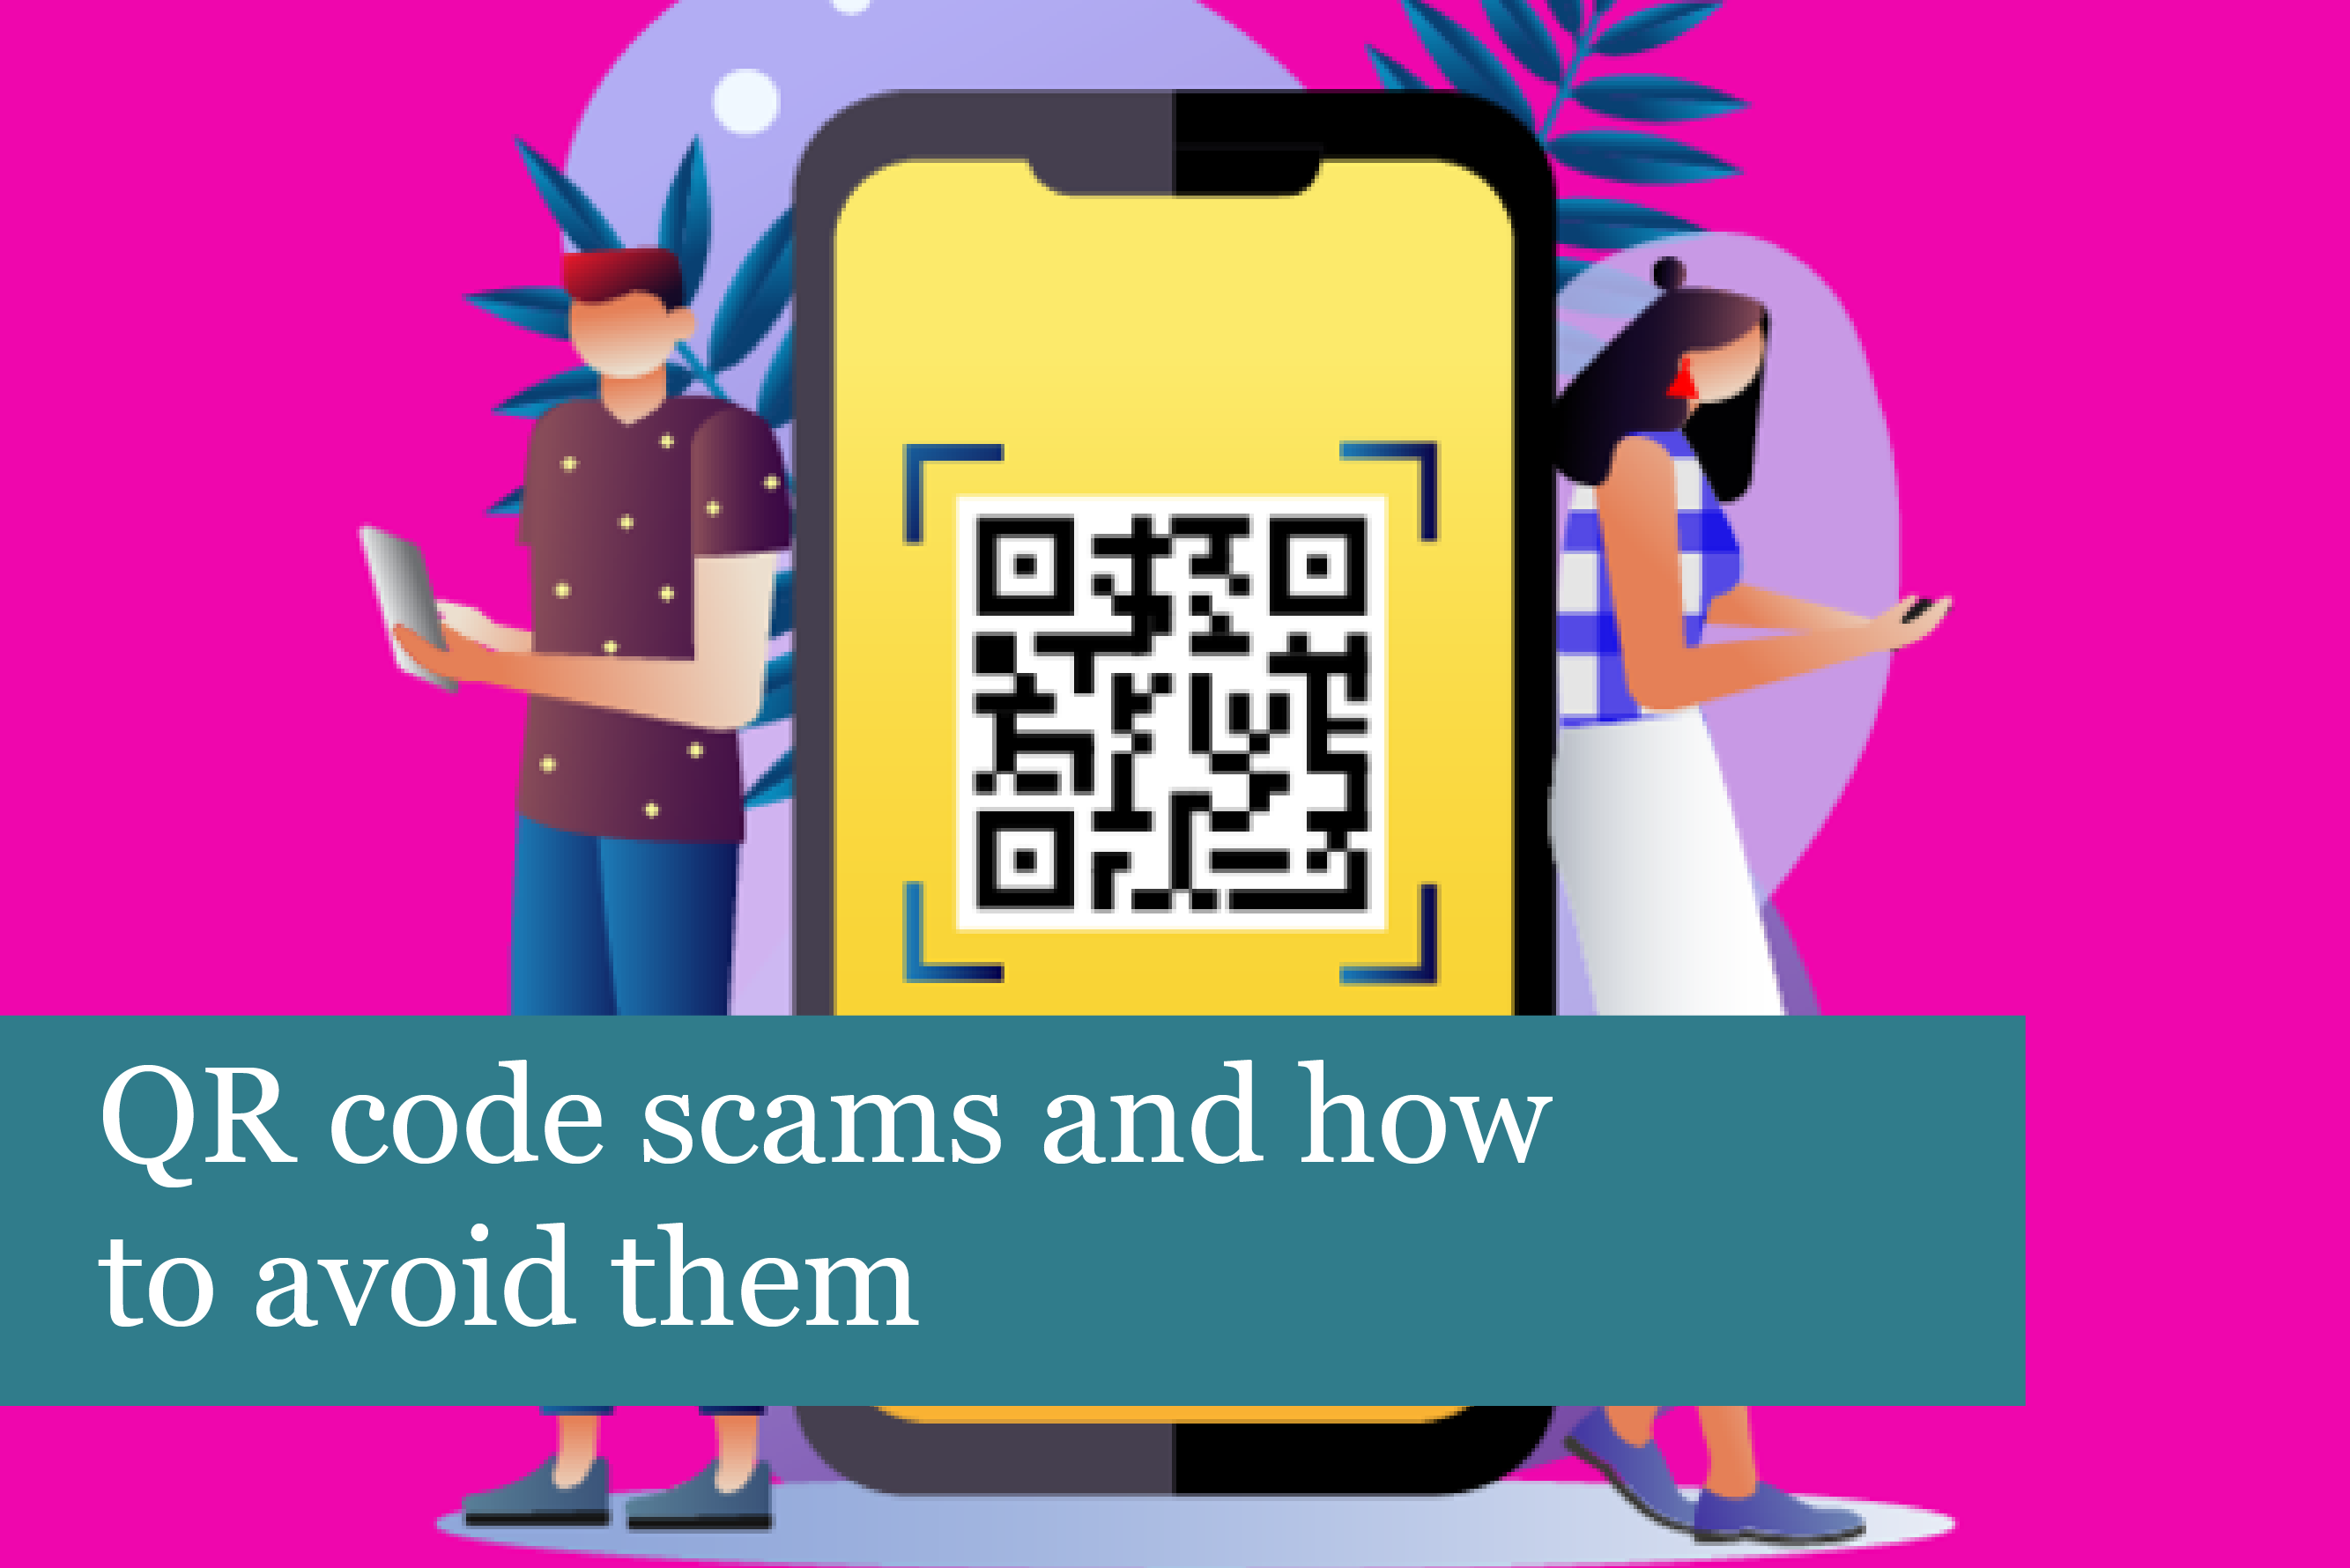 QR code scams and how to avoid them